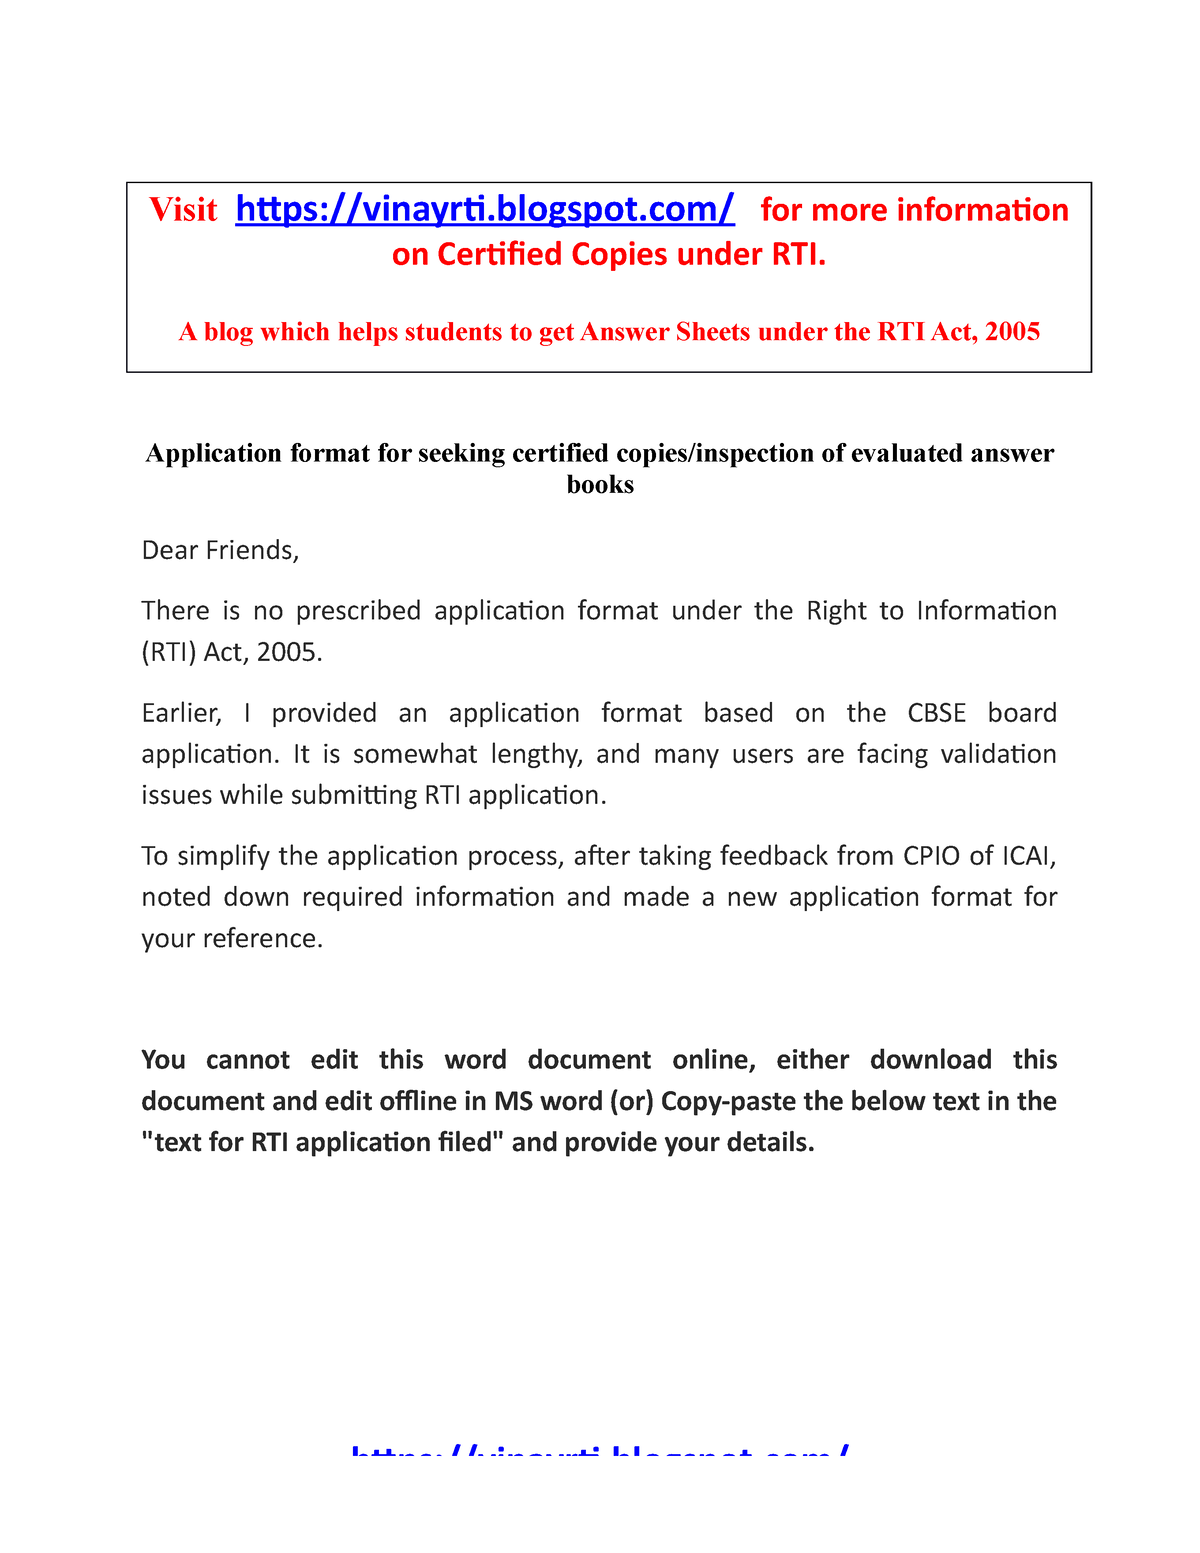 application-format-for-certified-copies-visit-vinayrti-blogspot-for-more-information-on